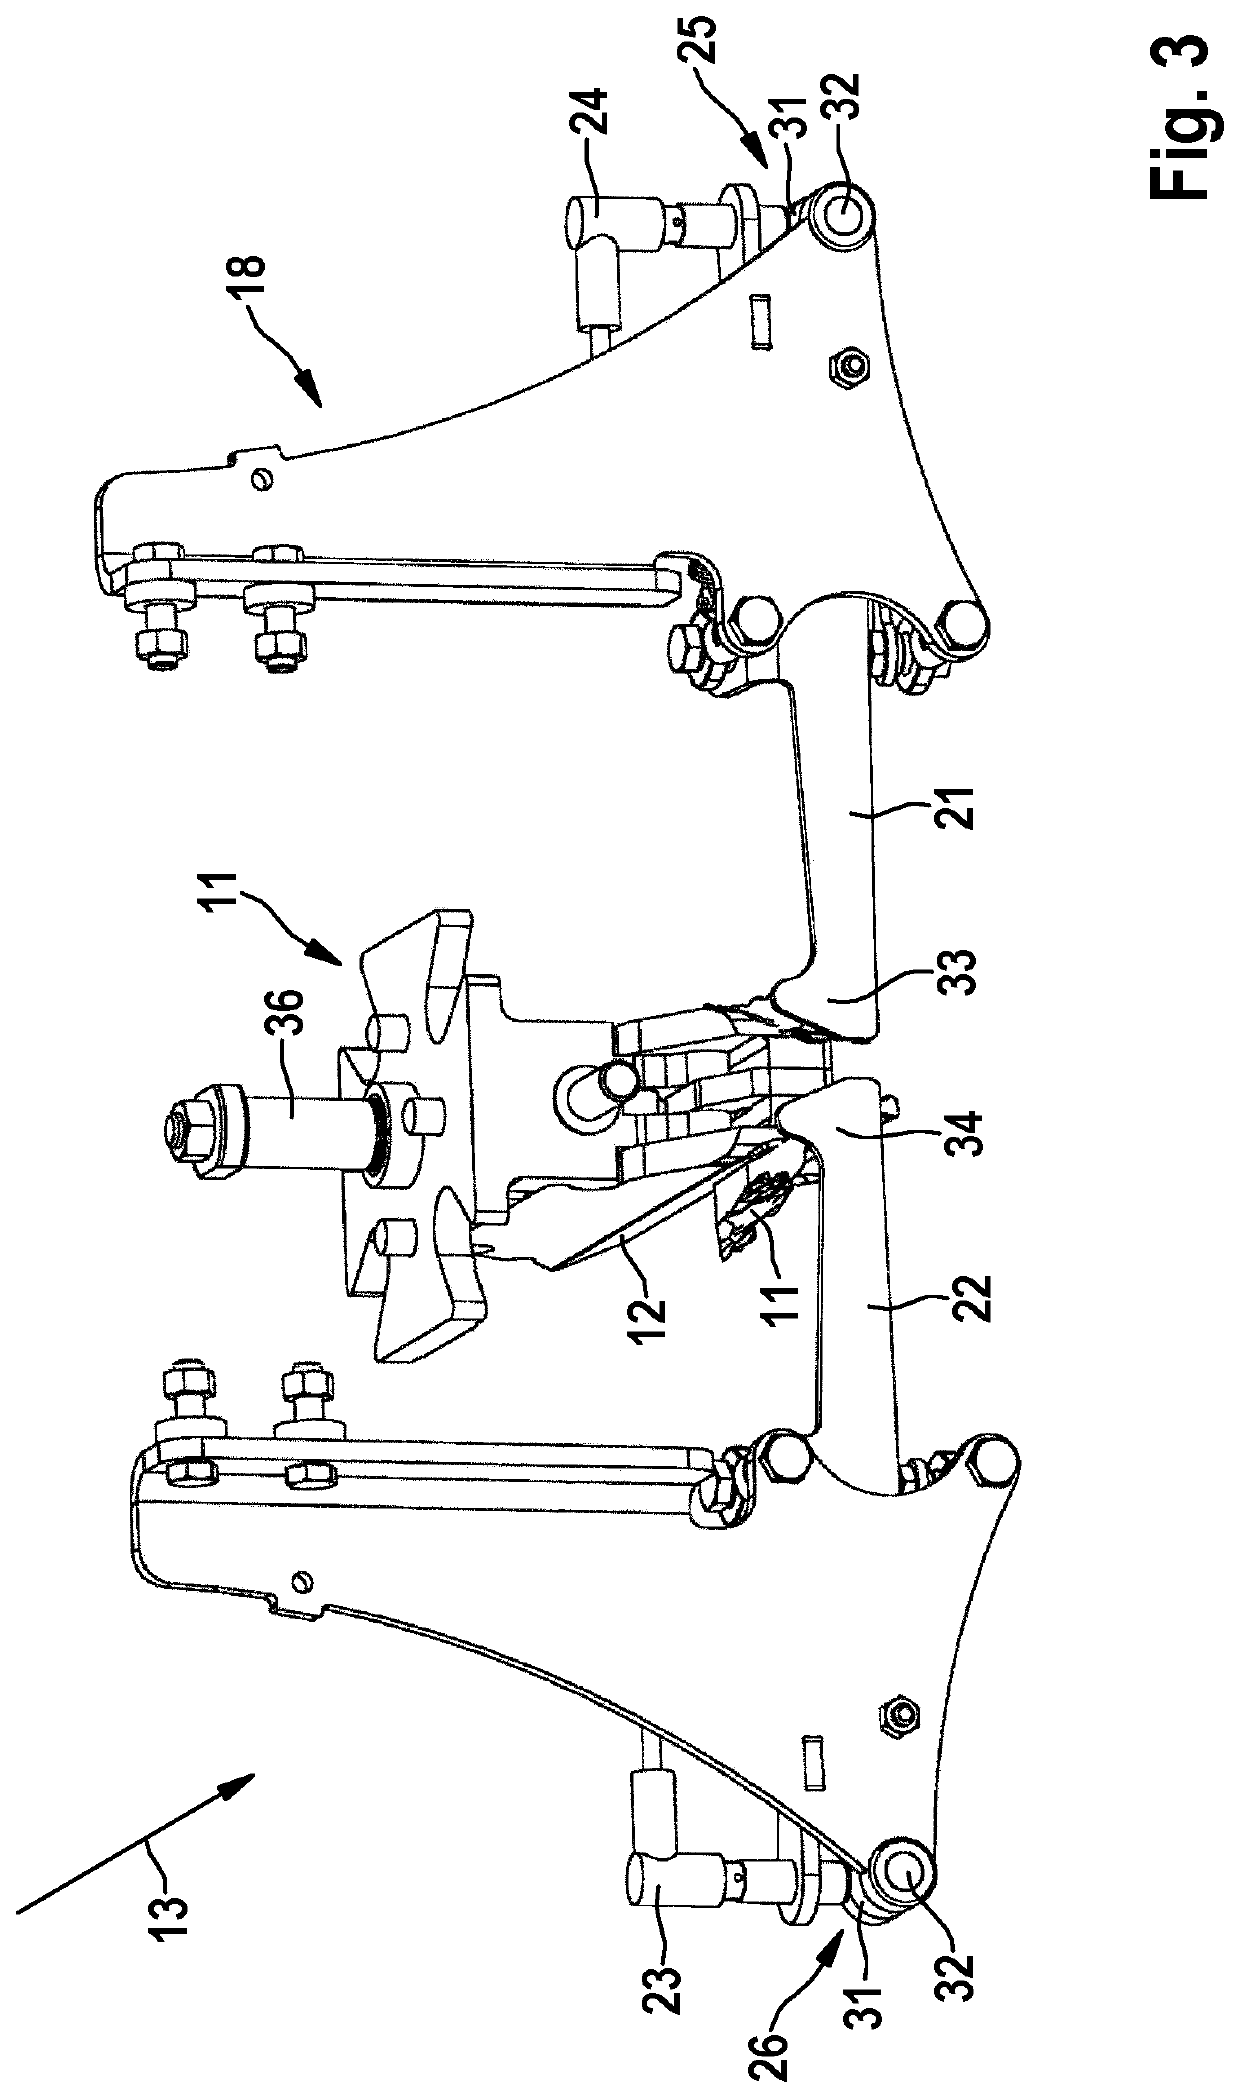 Device for measuring the shoulder joint position of continuously conveyed poultry carcasses, arrangements for filleting poultry carcasses and corresponding methods